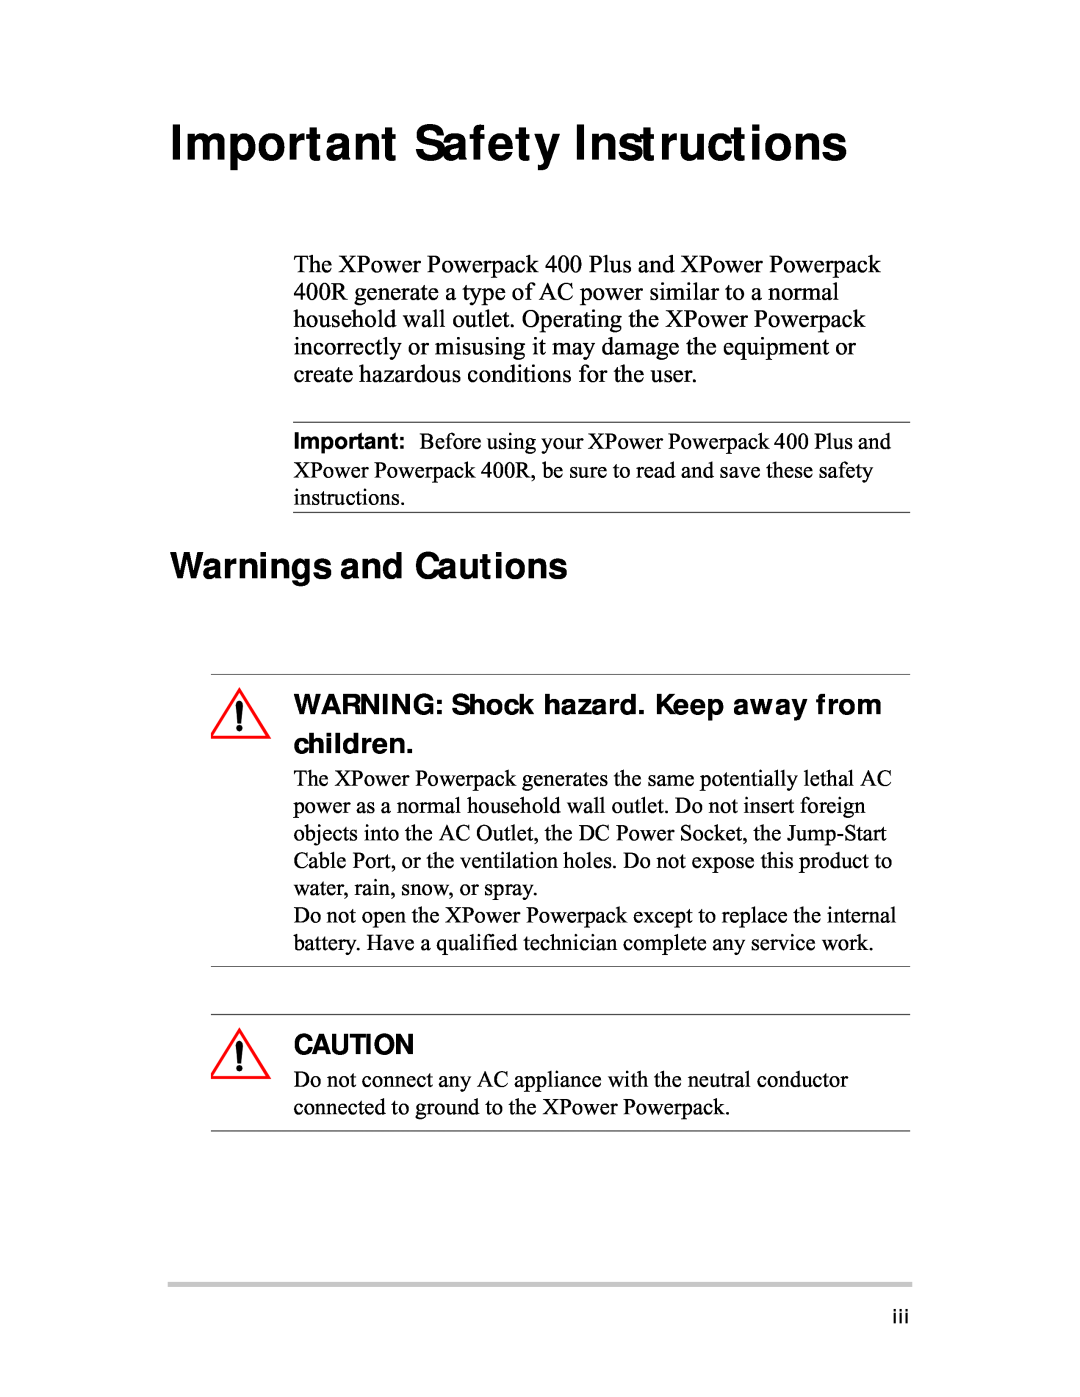 Xantrex Technology 400R manual Important Safety Instructions, Warnings and Cautions 